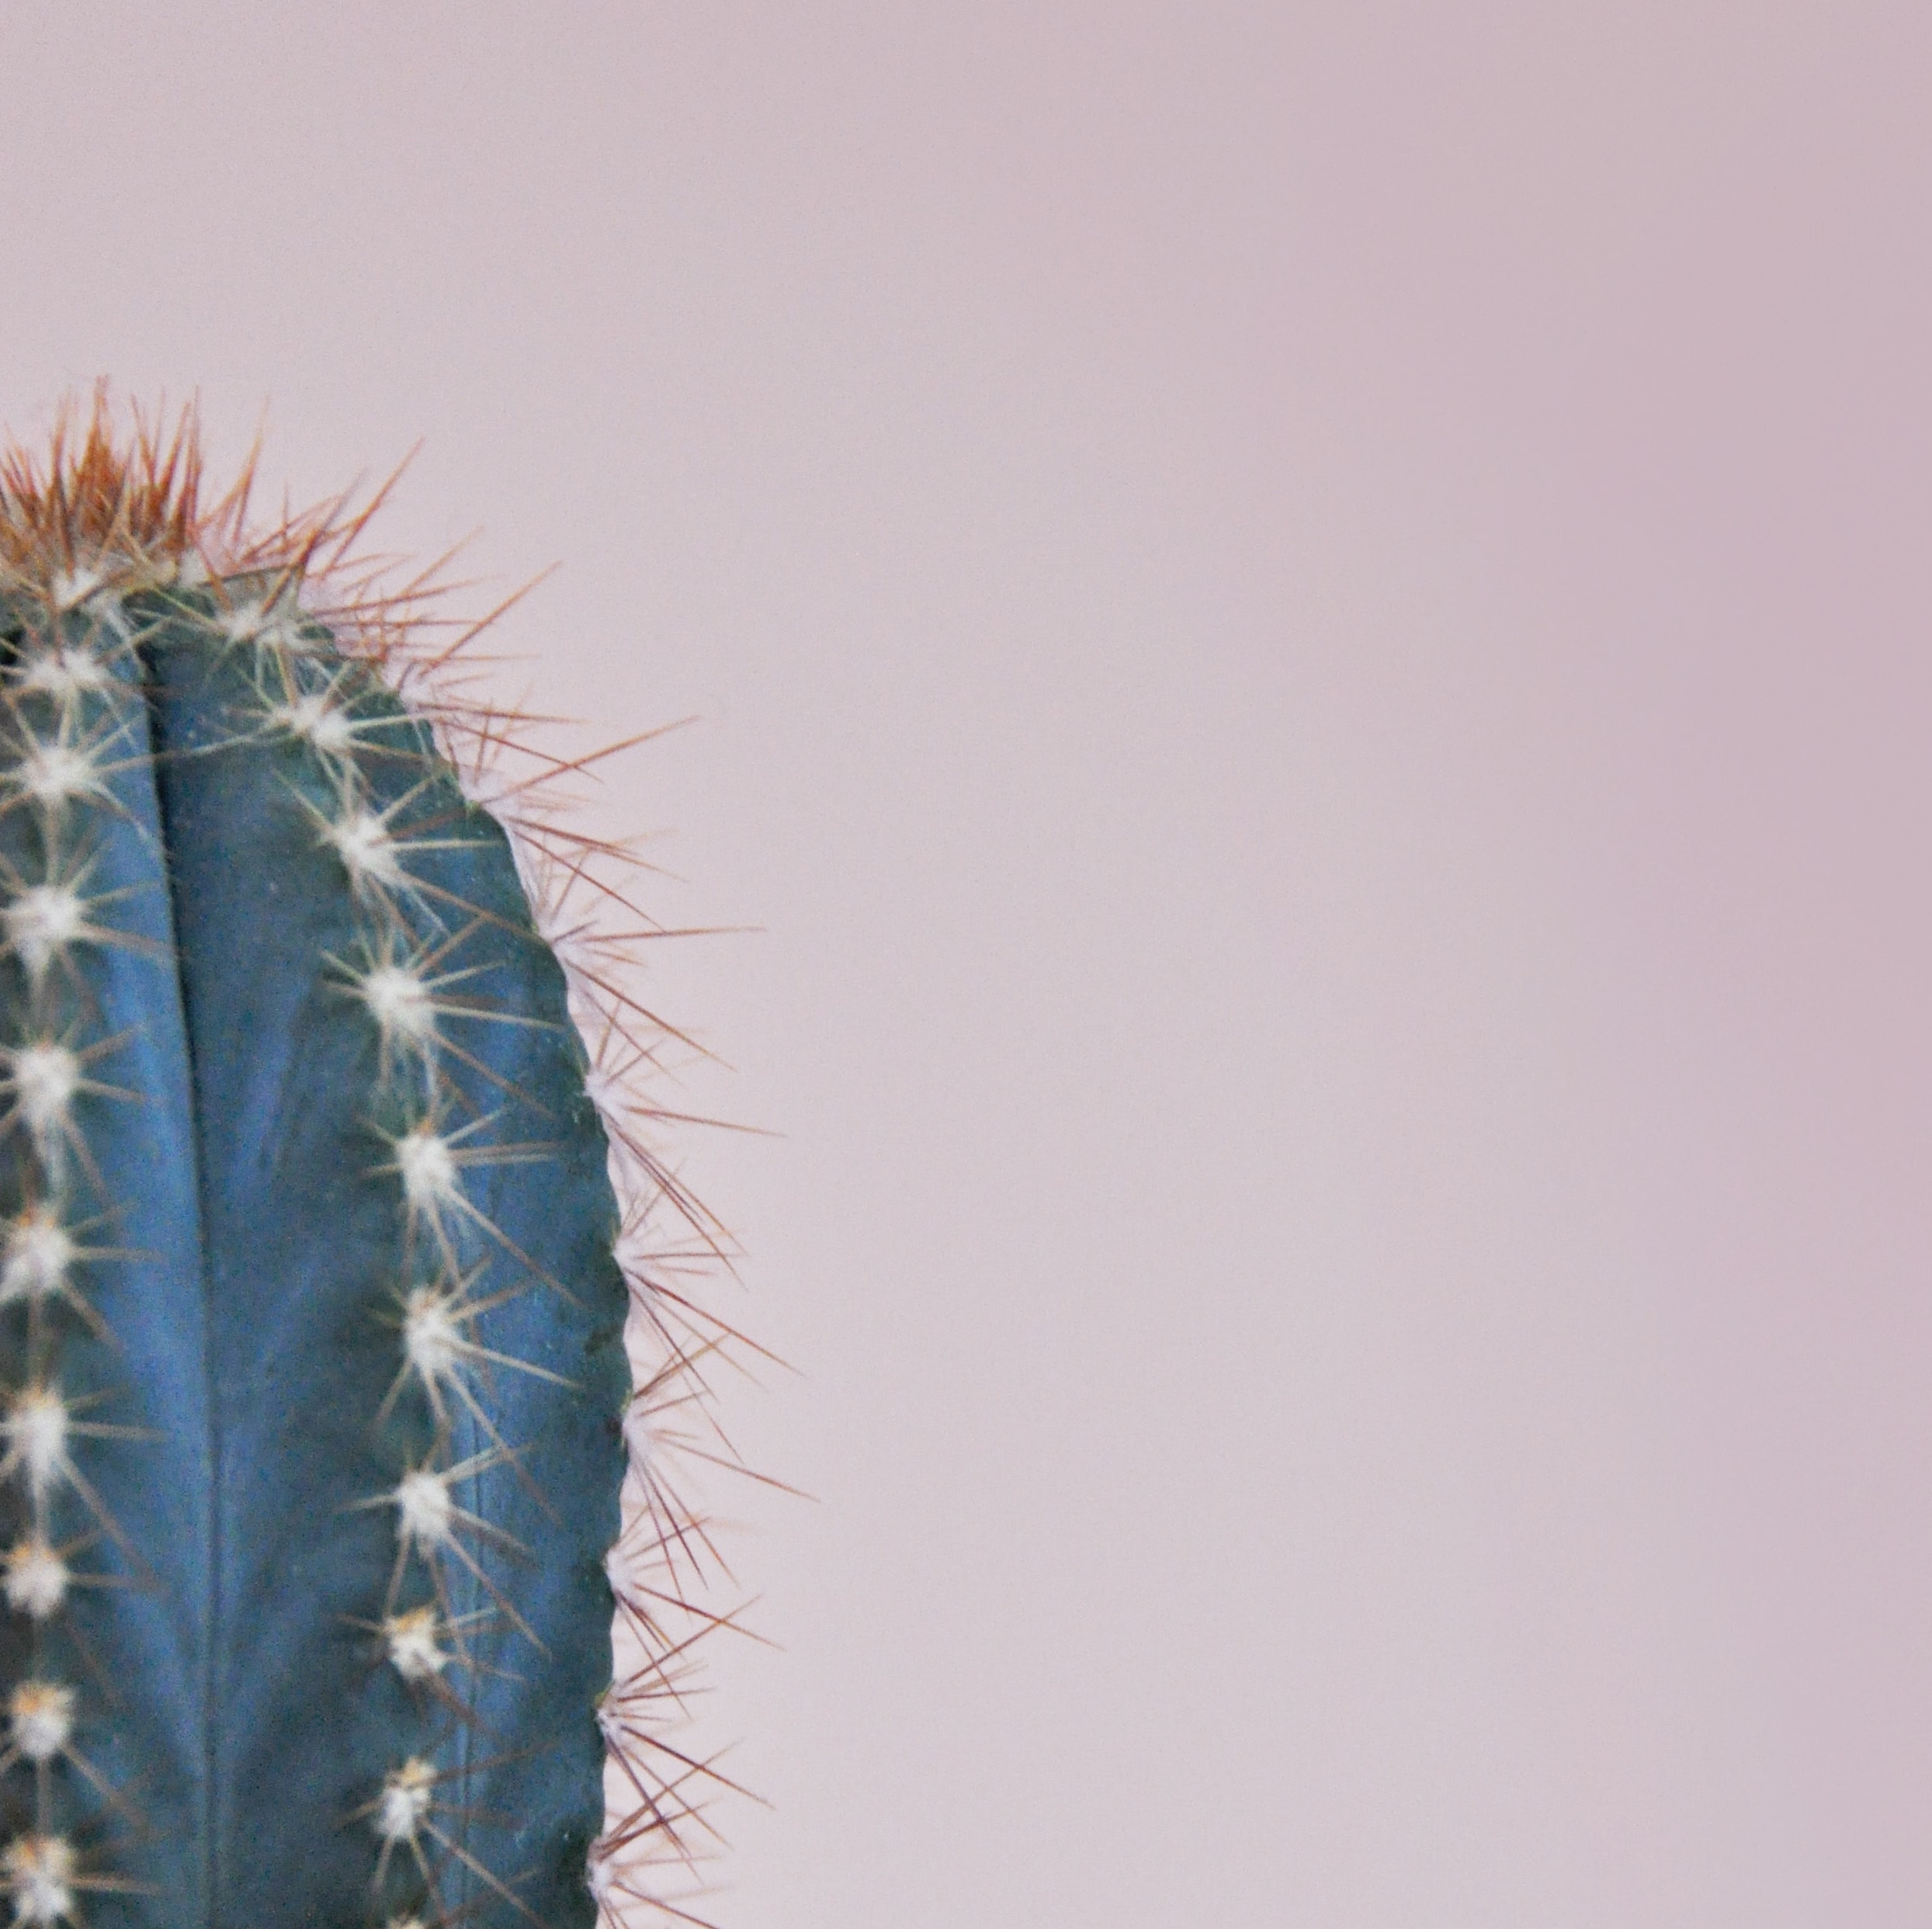 Cactus in front of pink background